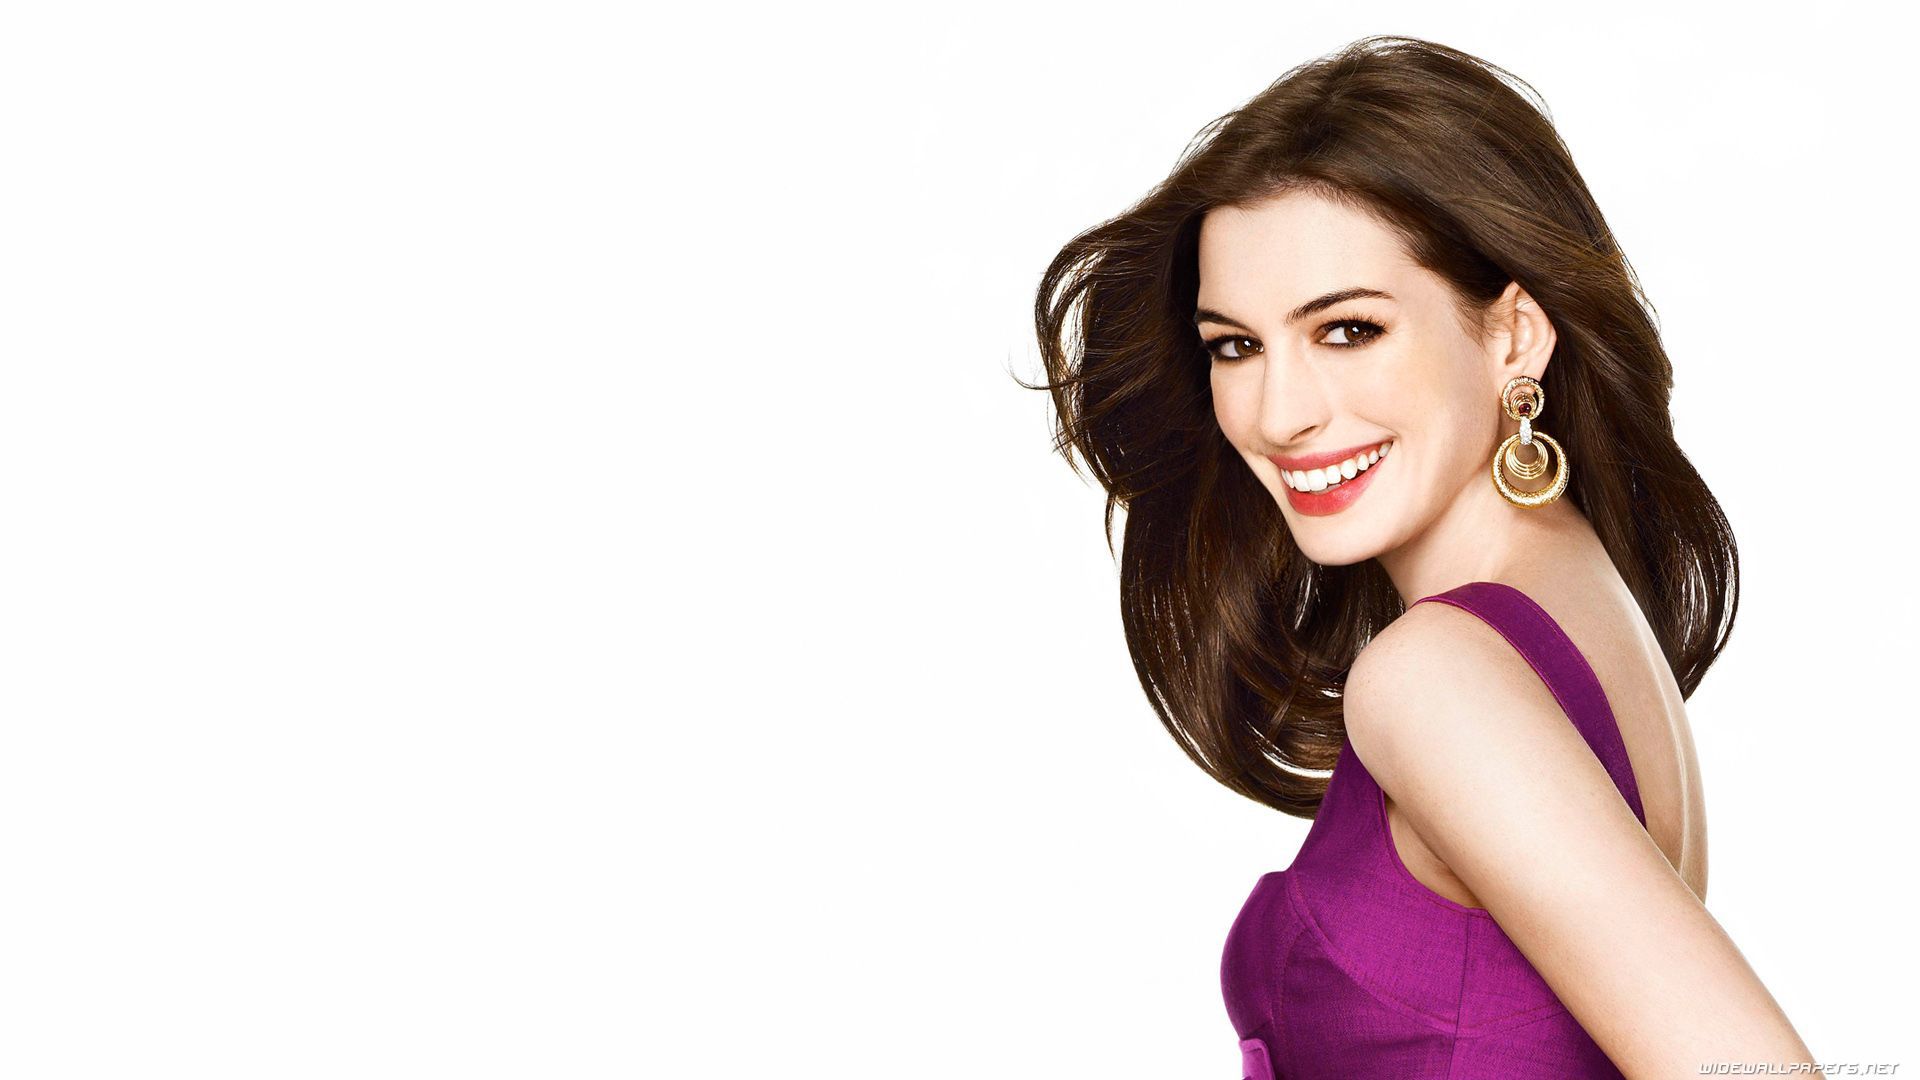 Anne Hathaway 1080x1920 Resolution Wallpapers Iphone 76s6 Plus Pixel xl  One Plus 33t5